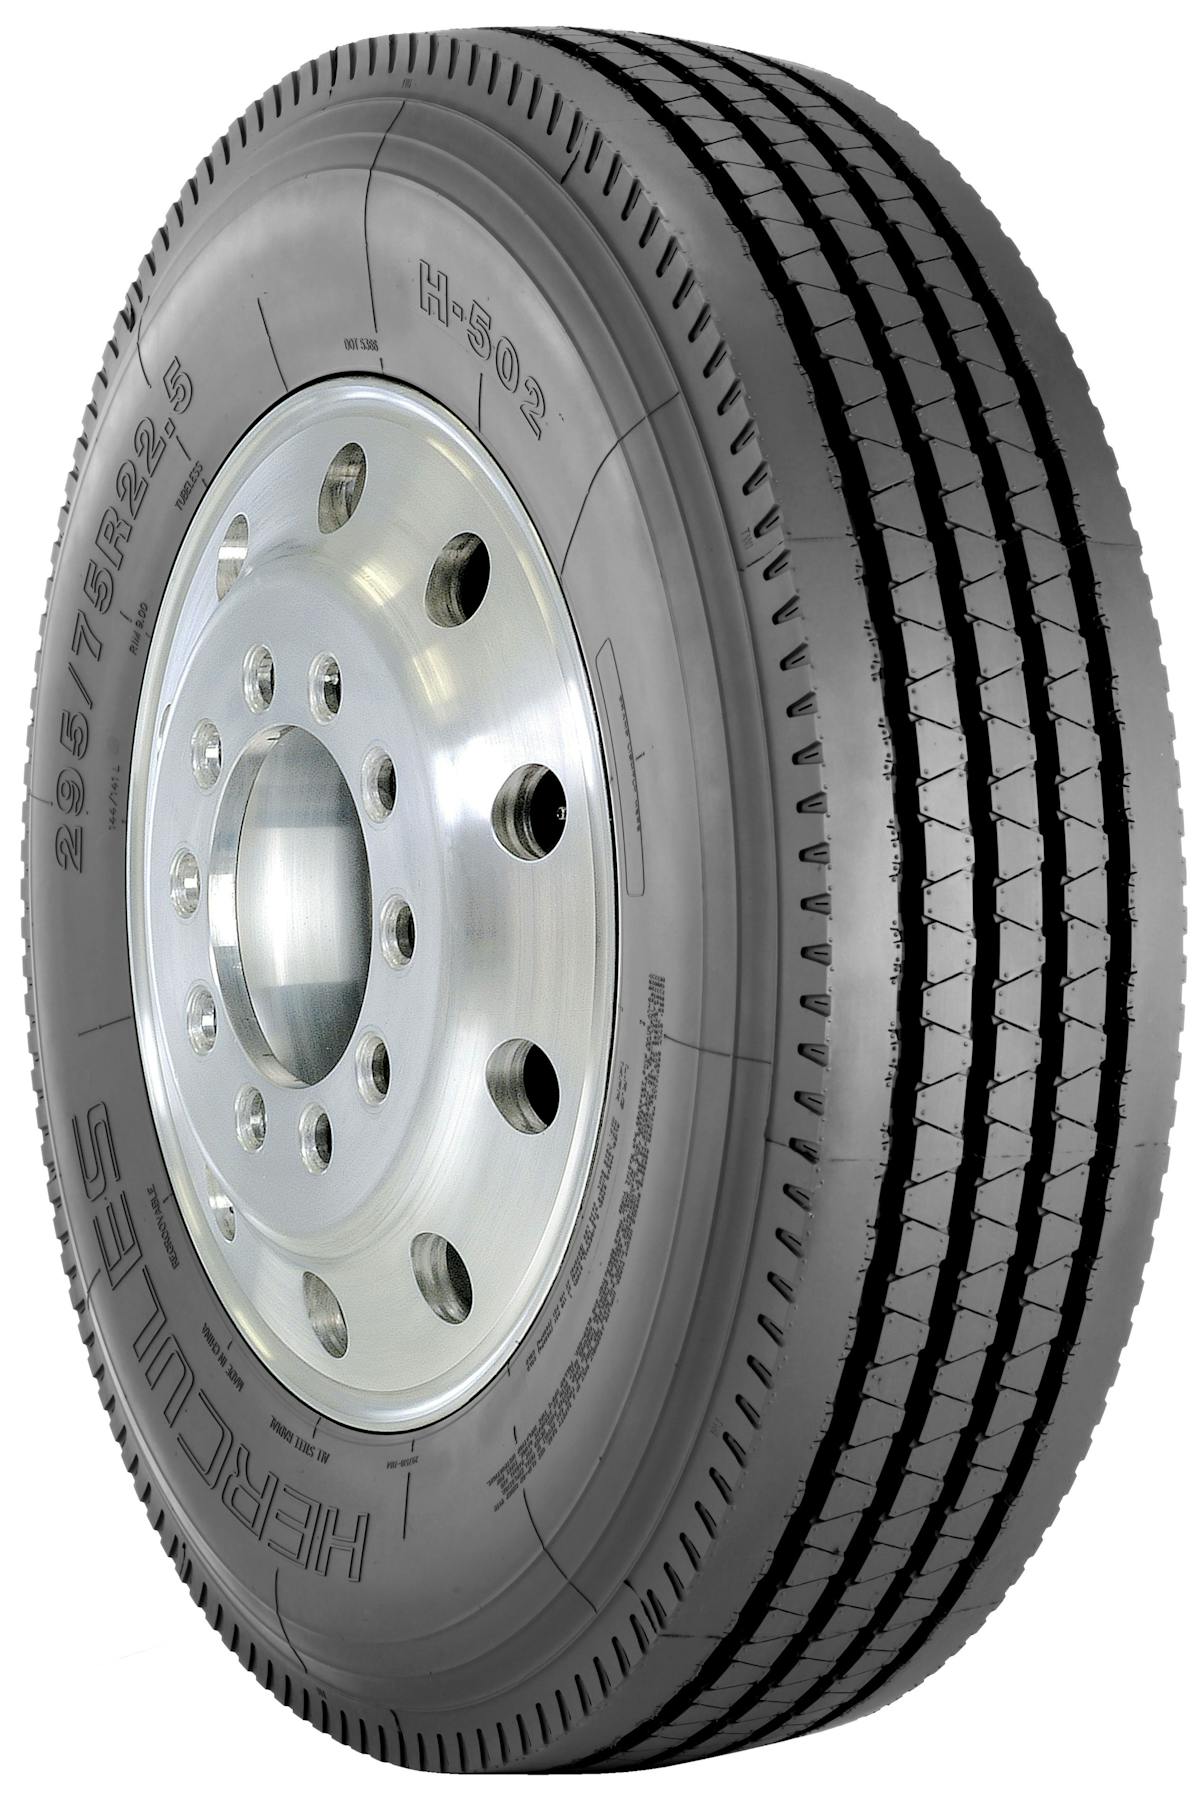 hercules-adds-to-its-h-series-truck-tire-line